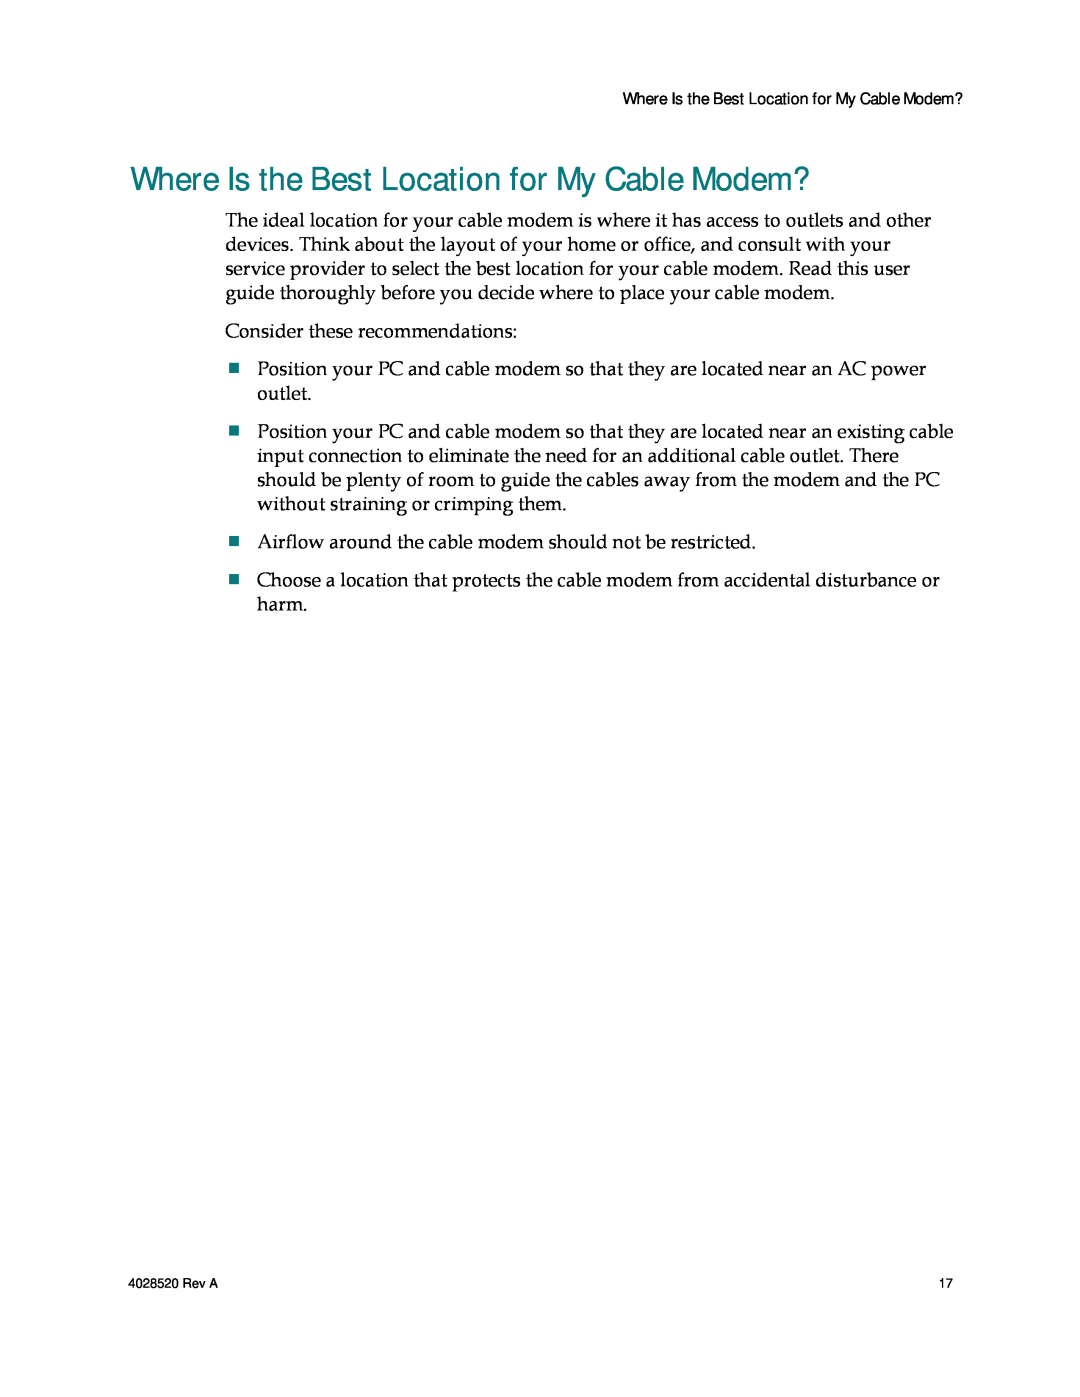 Cisco Systems DPQ2202 important safety instructions Where Is the Best Location for My Cable Modem? 